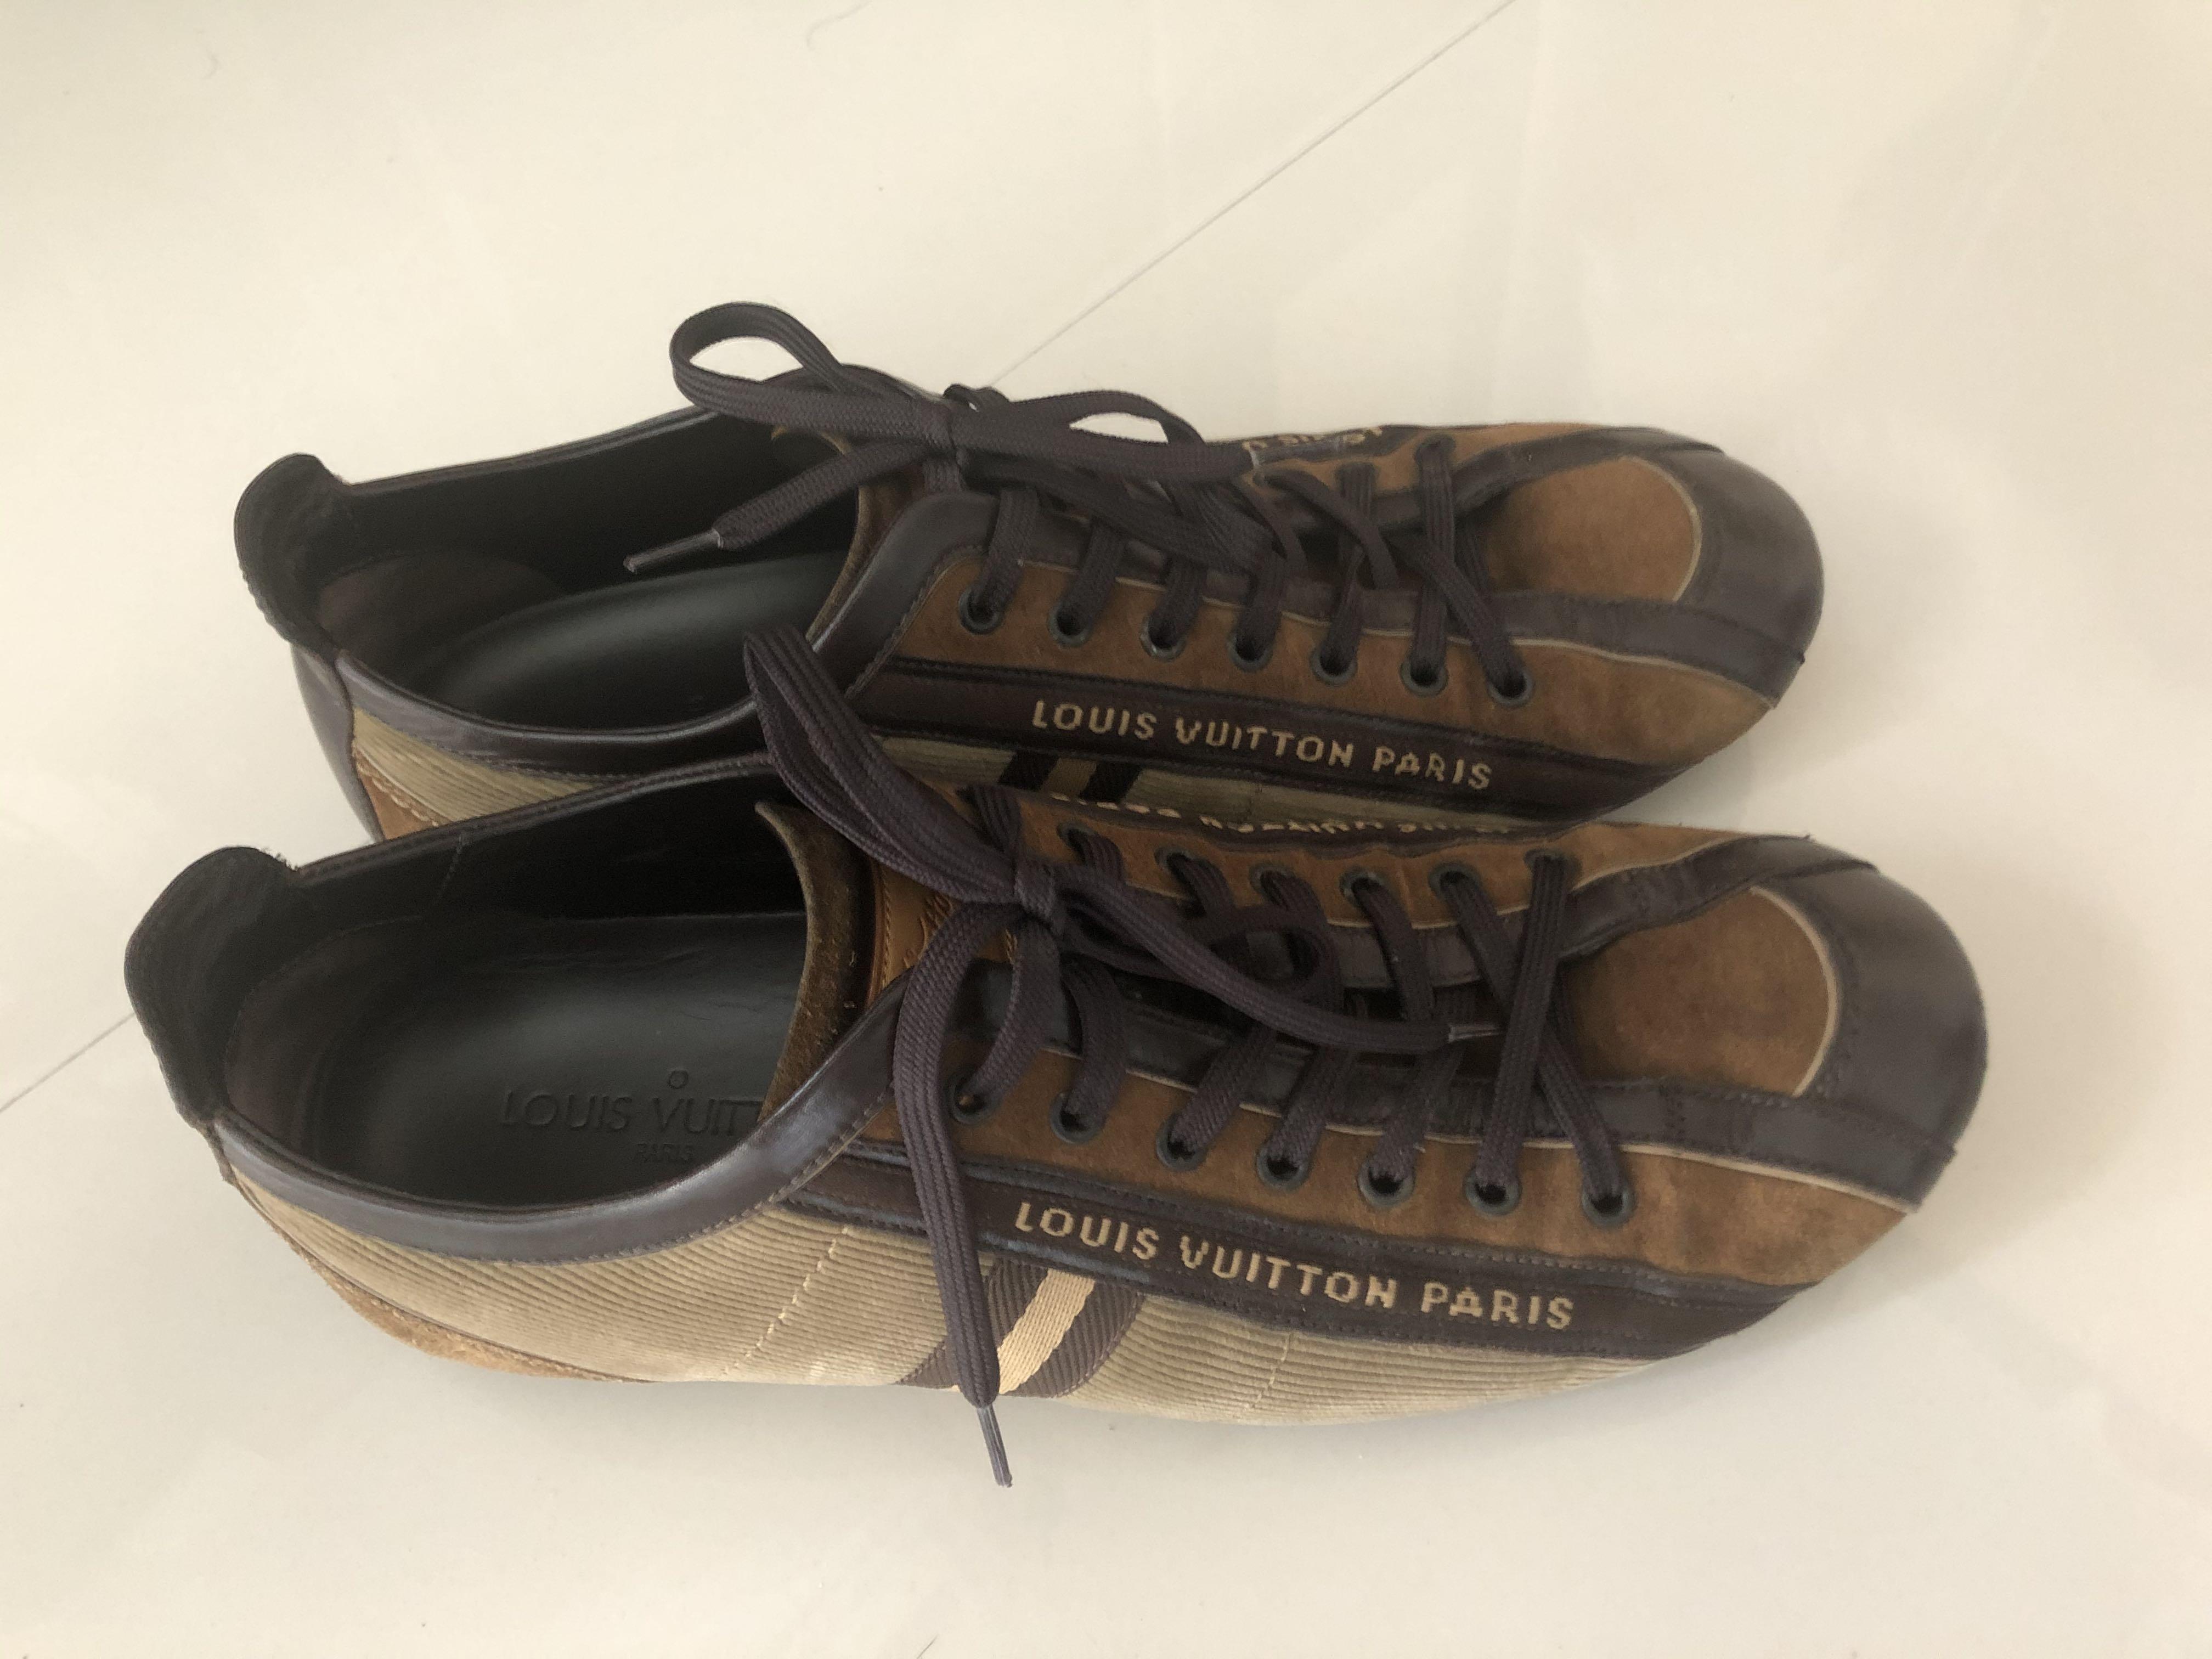 louis vuitton sneakers for girls size 25 or 8.5 us